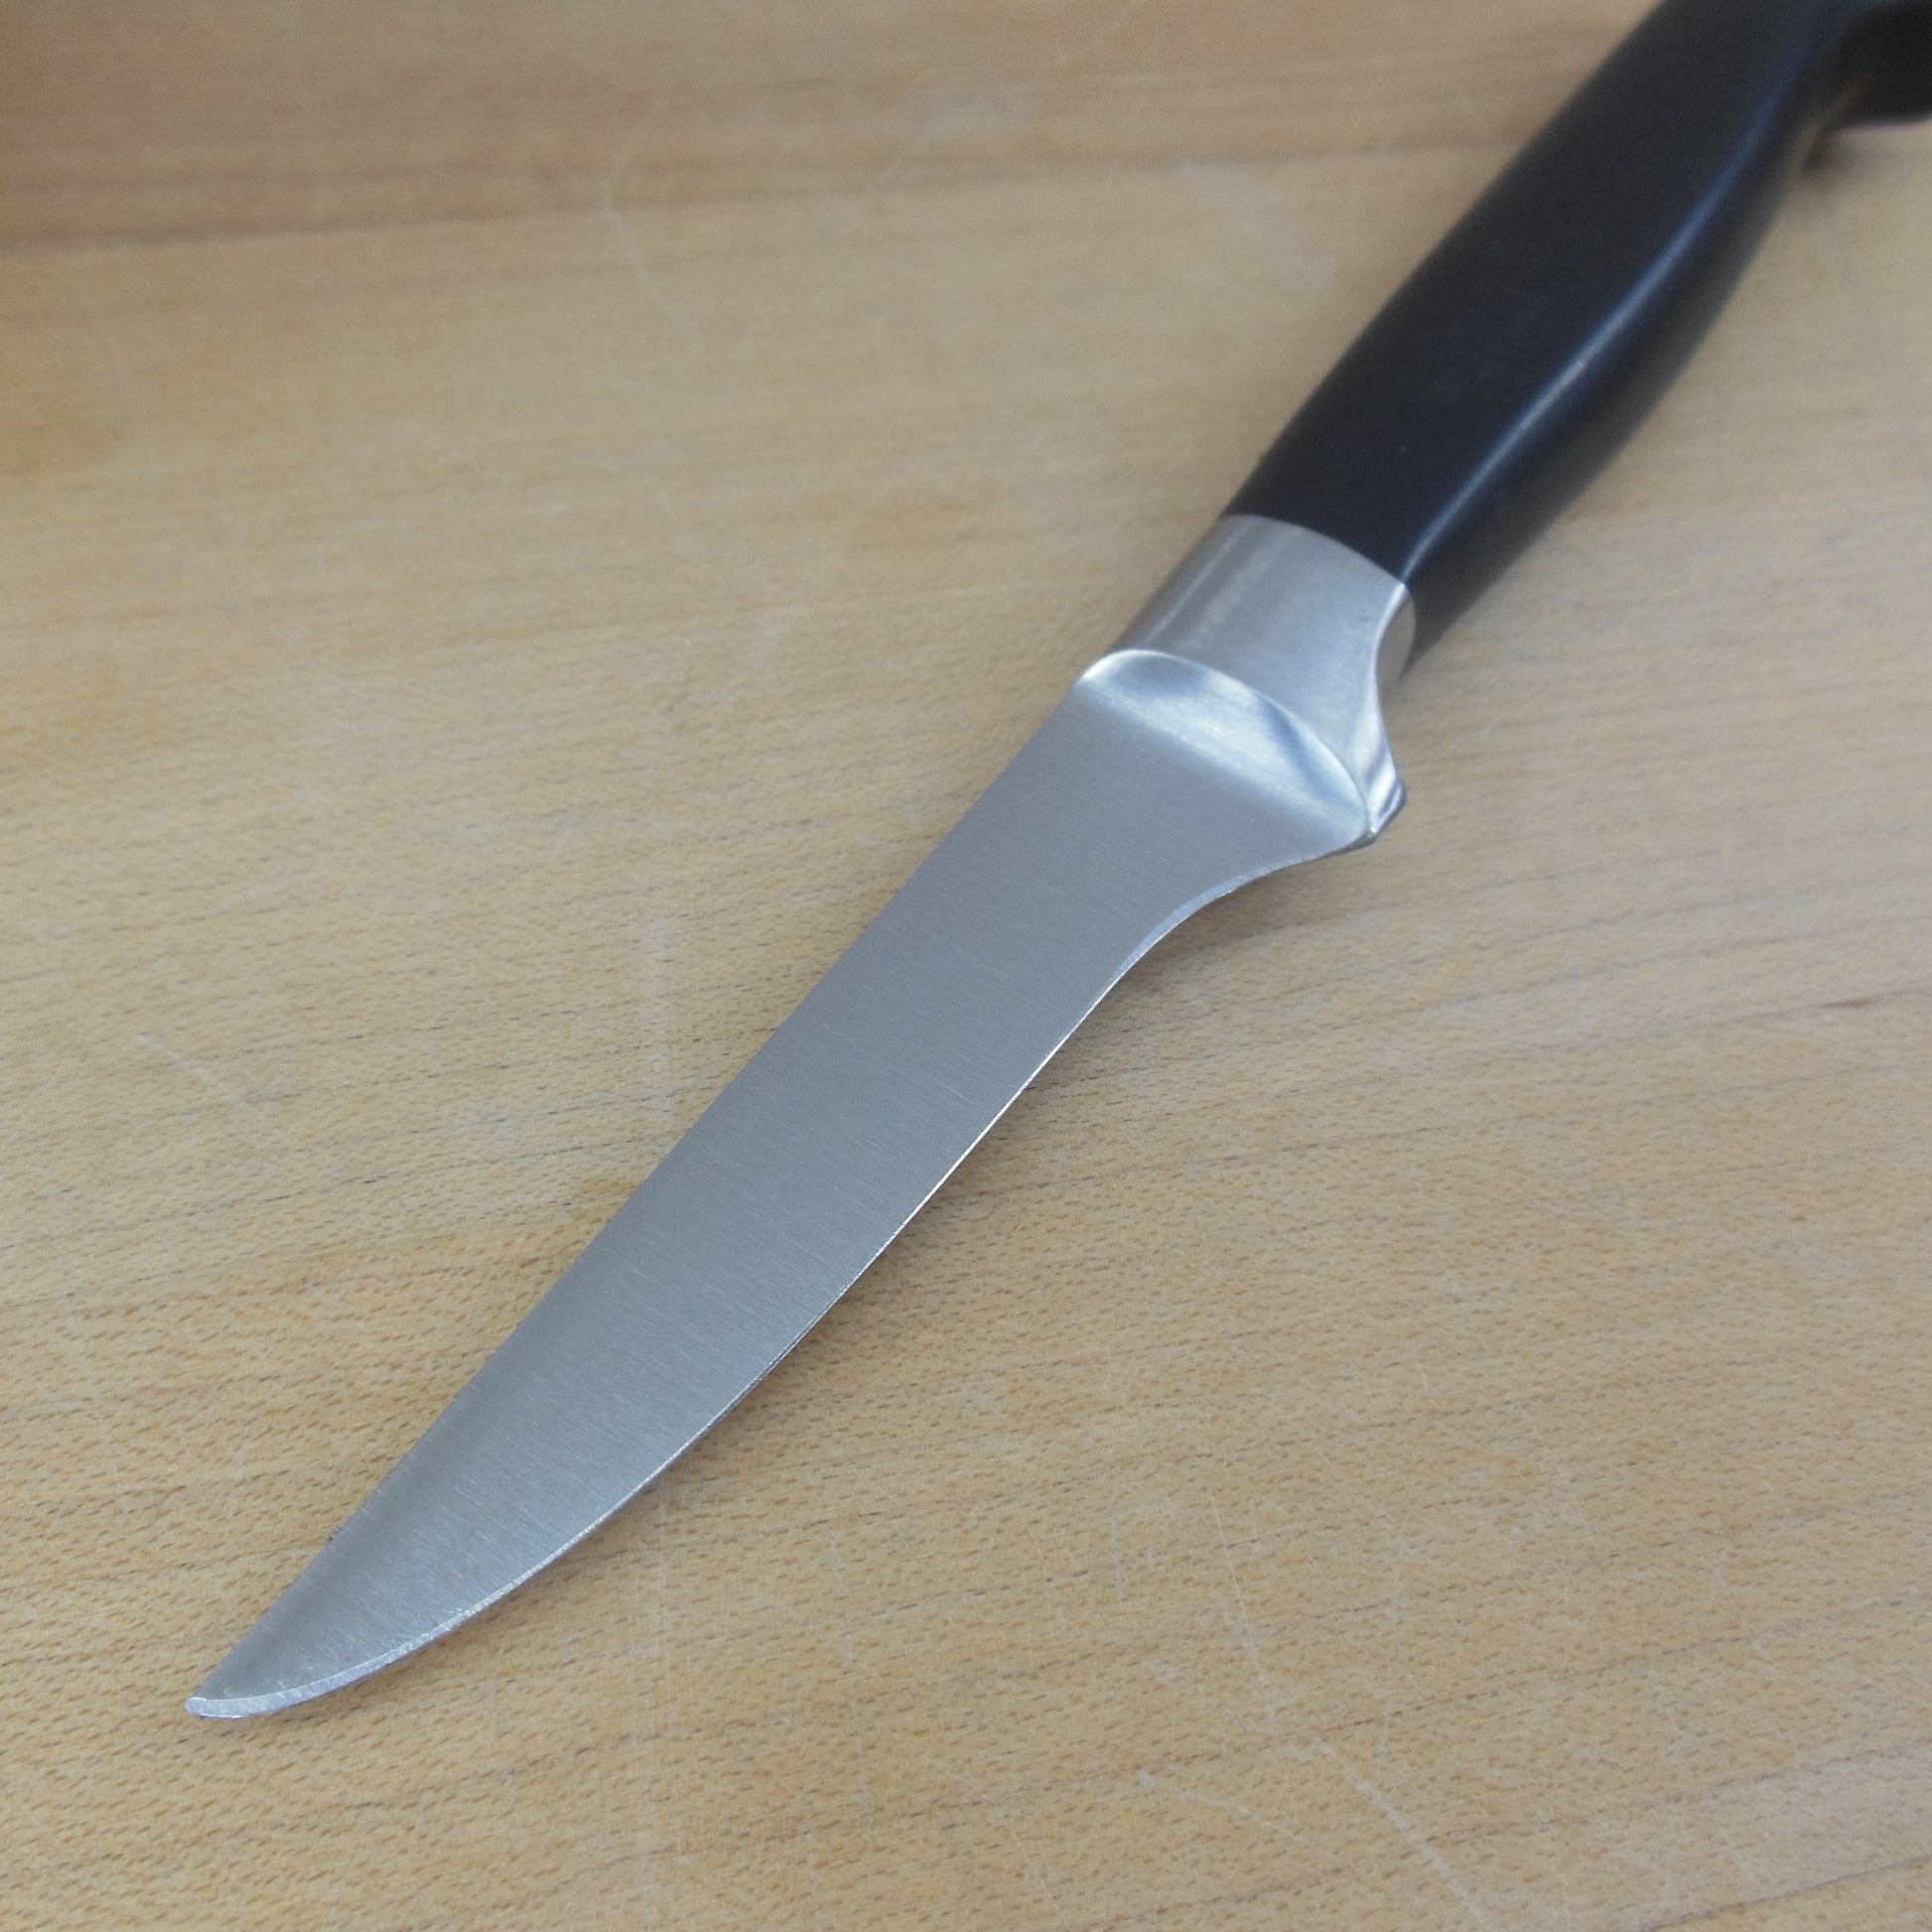 J.A. Henckels Germany 31070-200mm 8 Stainless Carving Knife